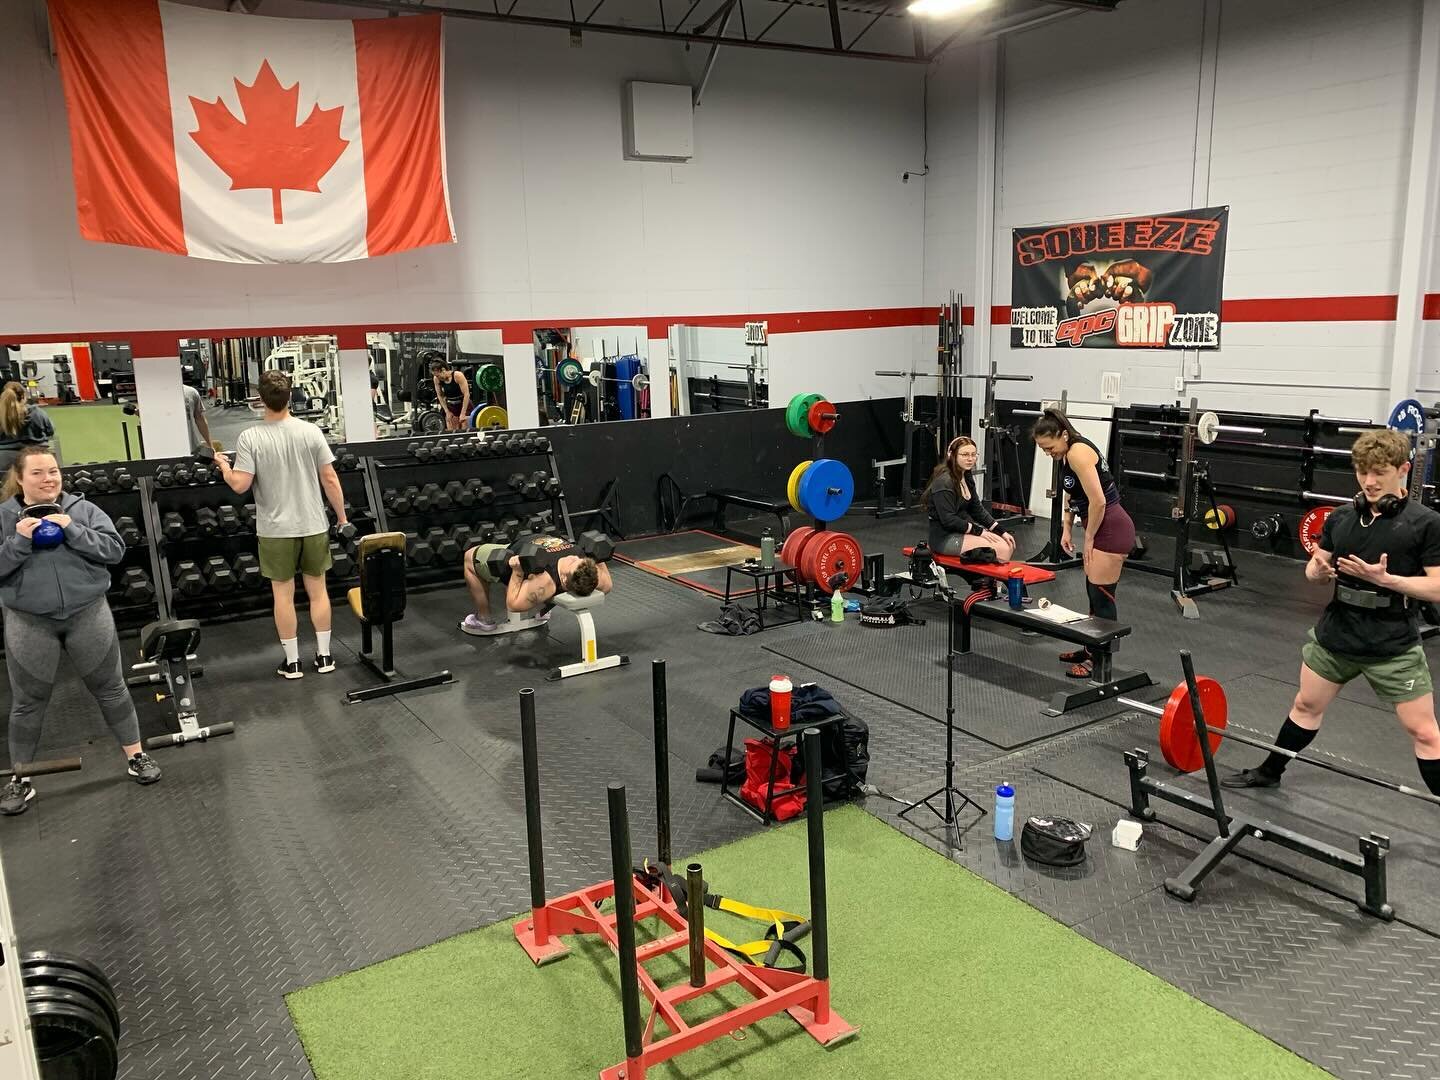 Looking for a community that will accept, encourage, and challenge you? Well look no farther than the Smart Fitness Strength Class! 

The strength training class is looking for 5 new members! Included in the monthly price is a personalized program, g